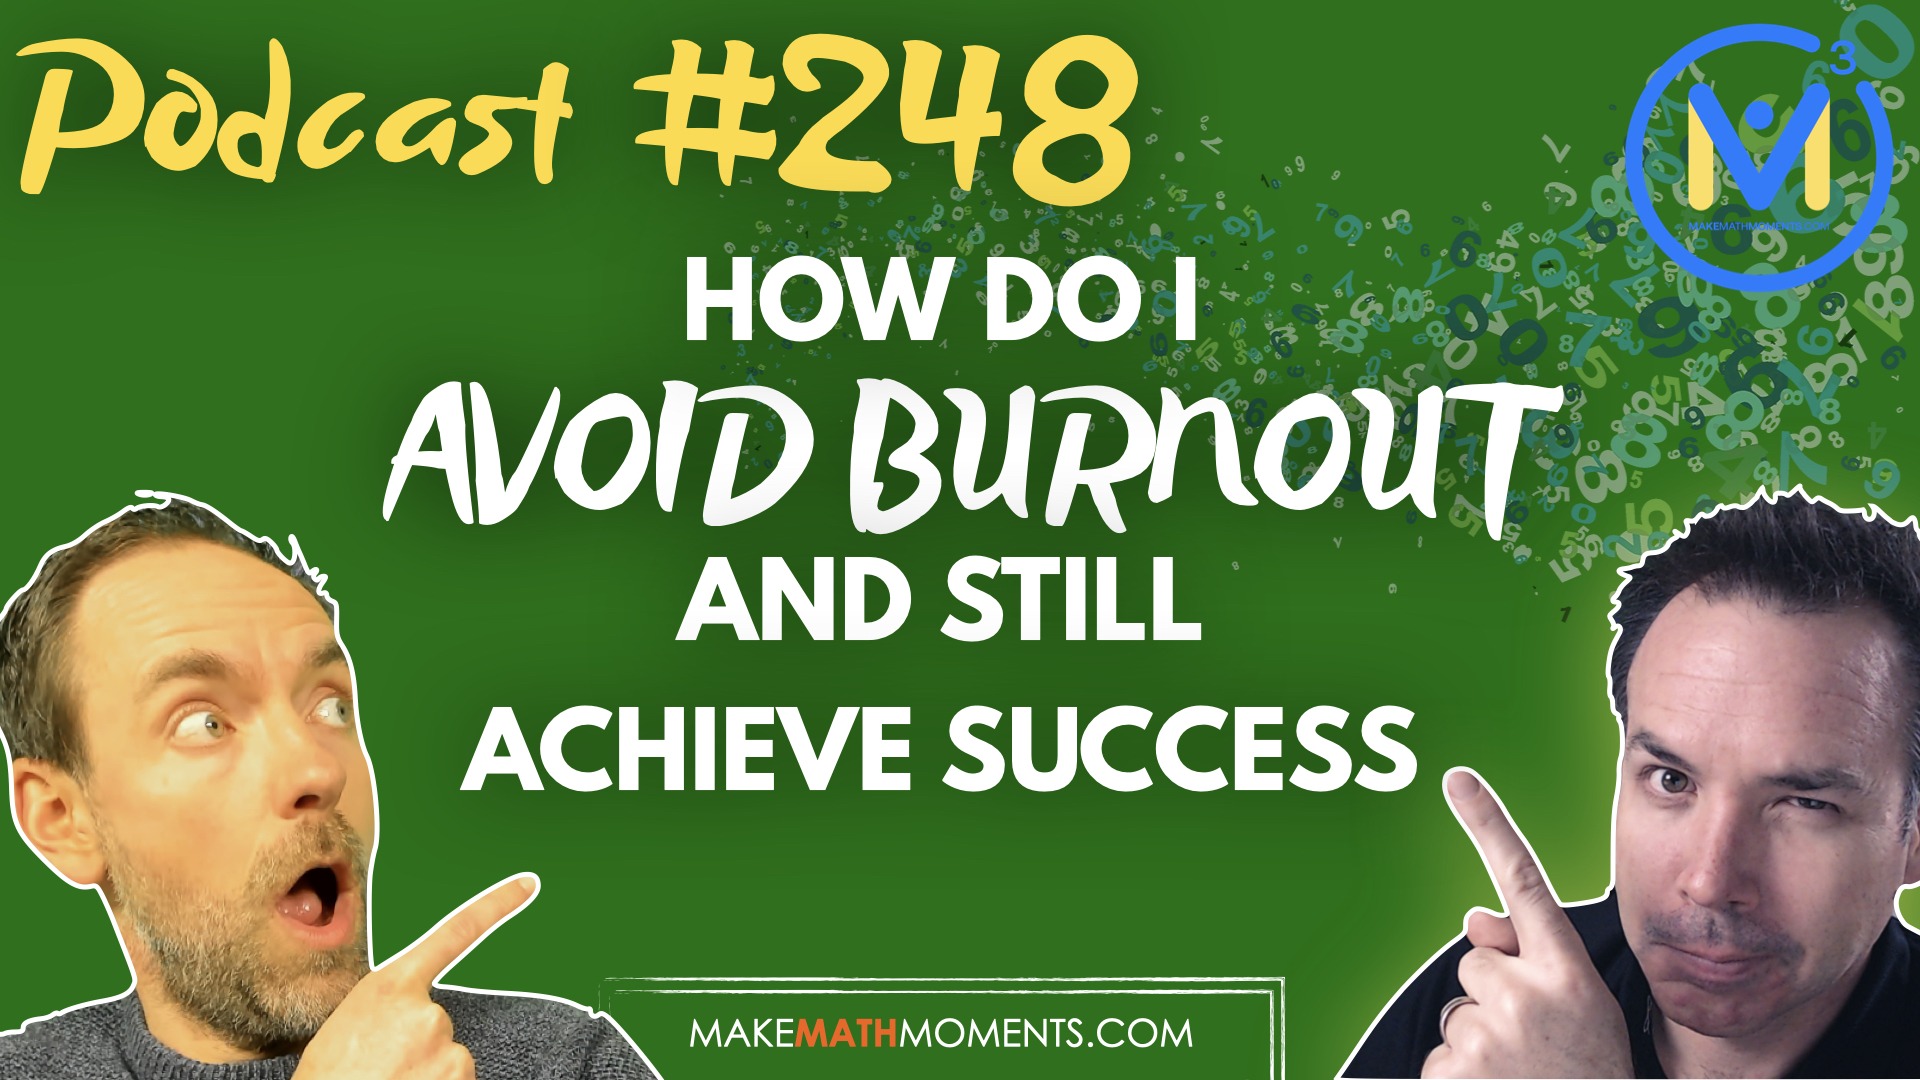 Episode #248: How Do I Avoid Burnout and Still Achieve Success